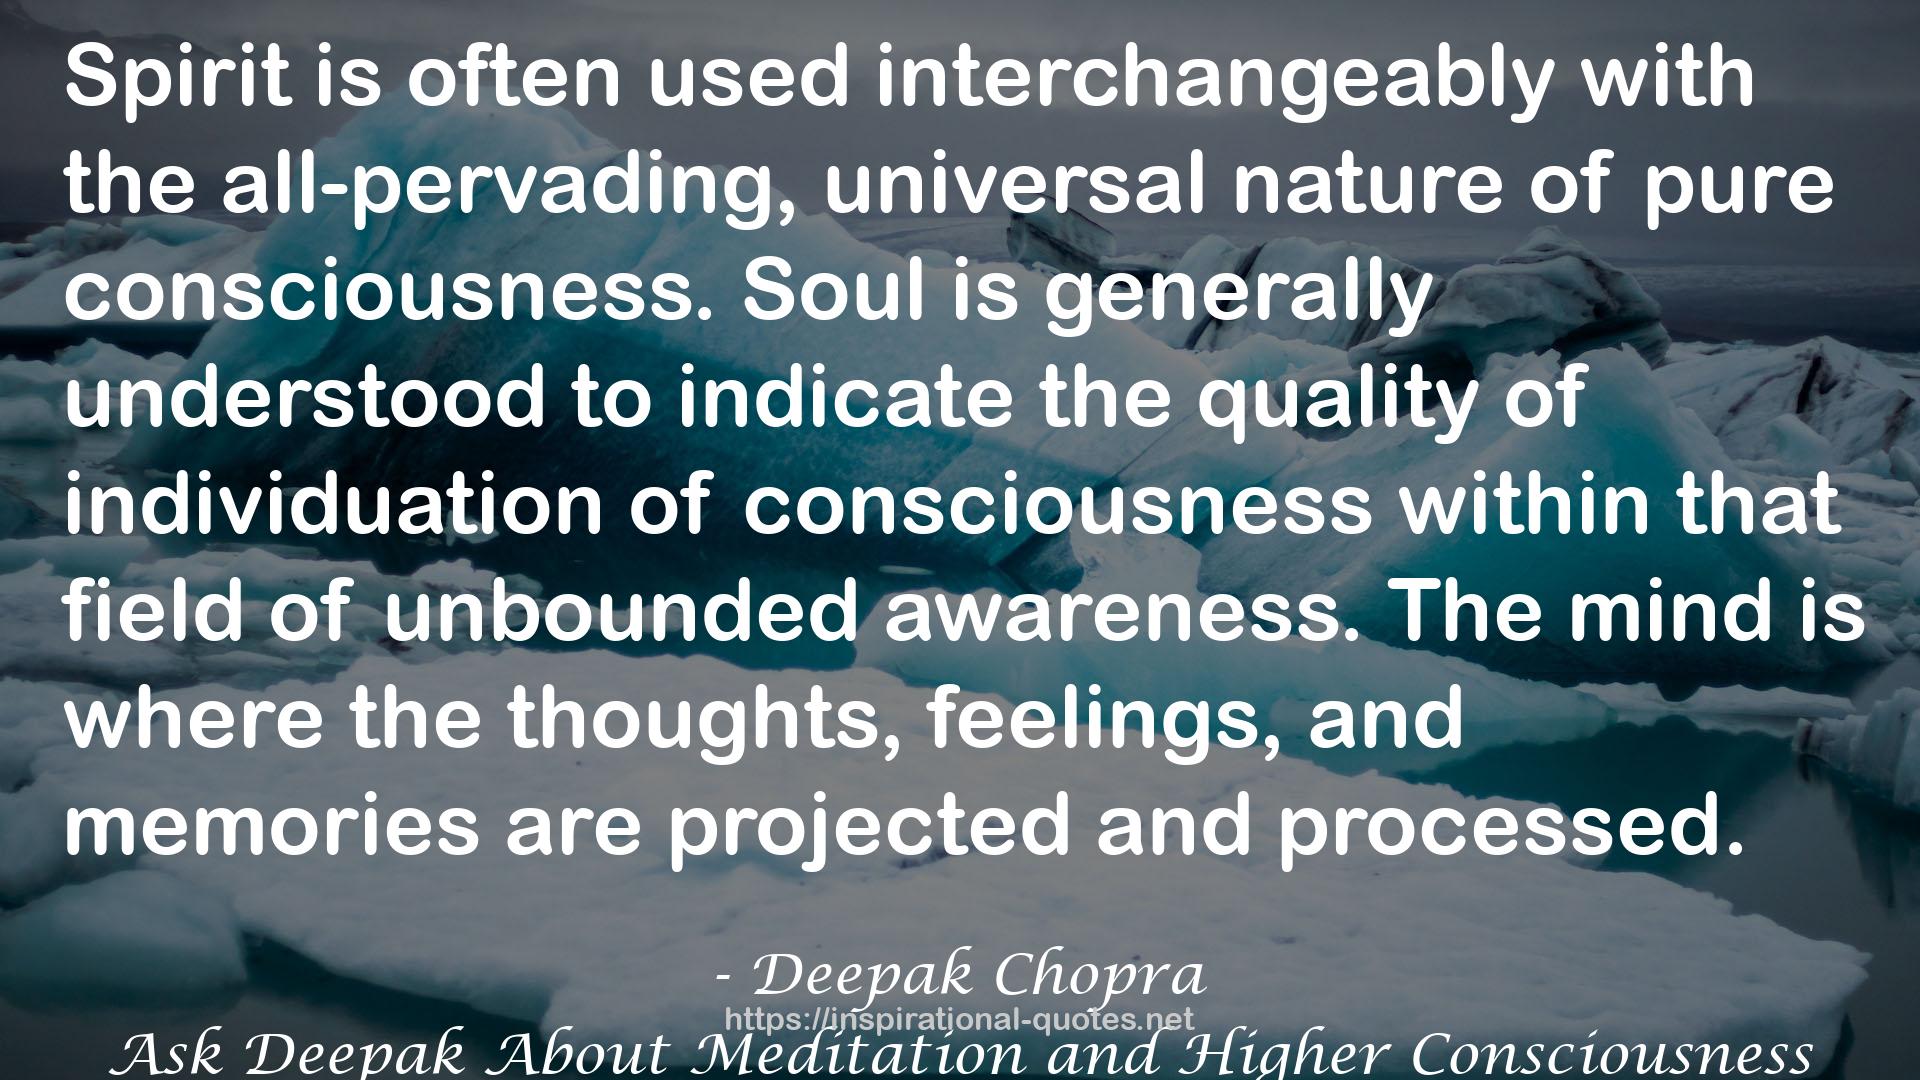 Ask Deepak About Meditation and Higher Consciousness QUOTES